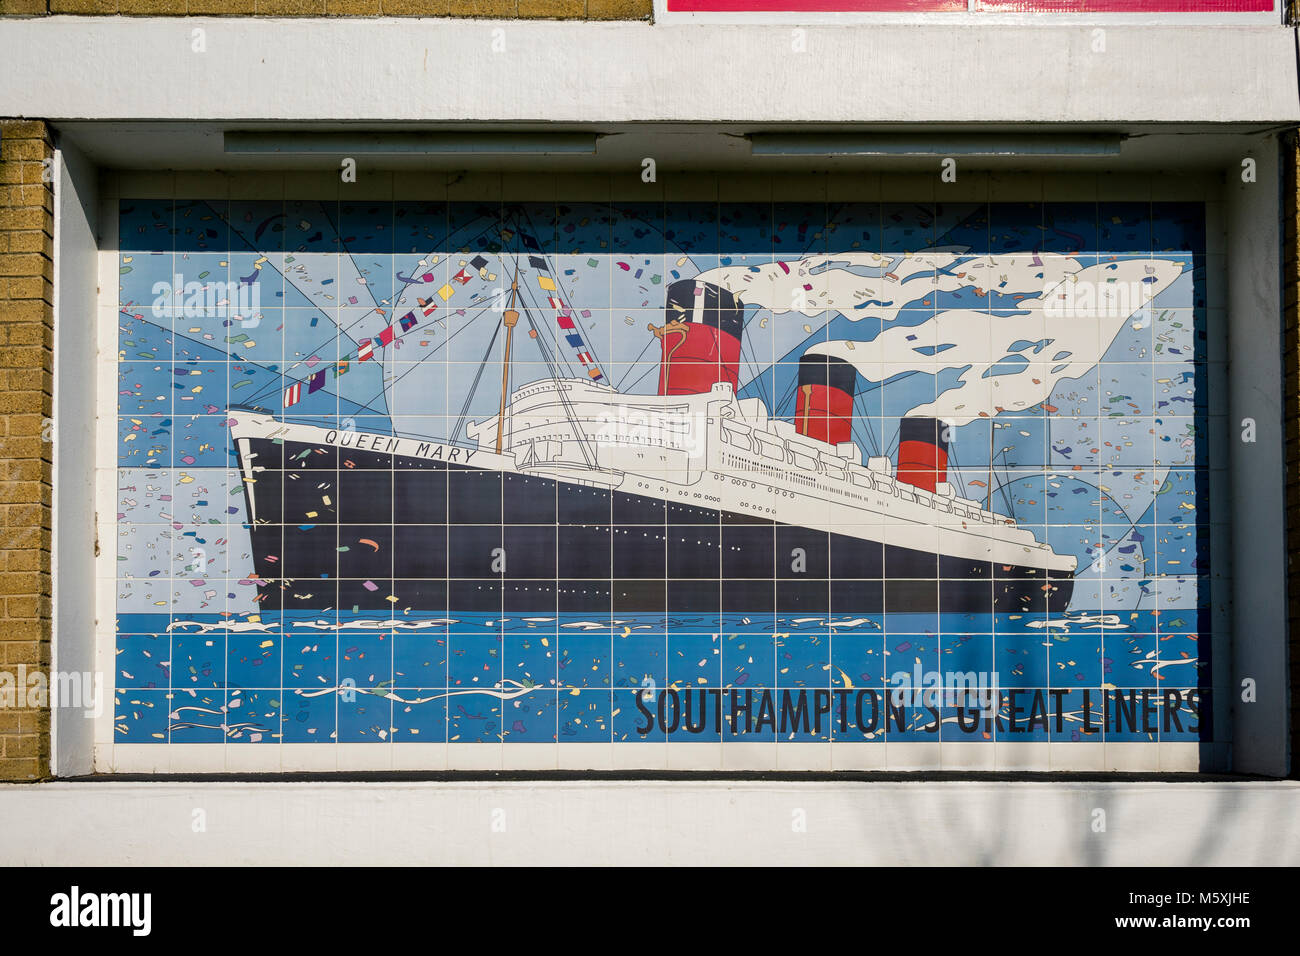 Wall mural of the Queen Elizabeth cruise liner in Holy Rood Council Estate in Southampton, England, UK Stock Photo